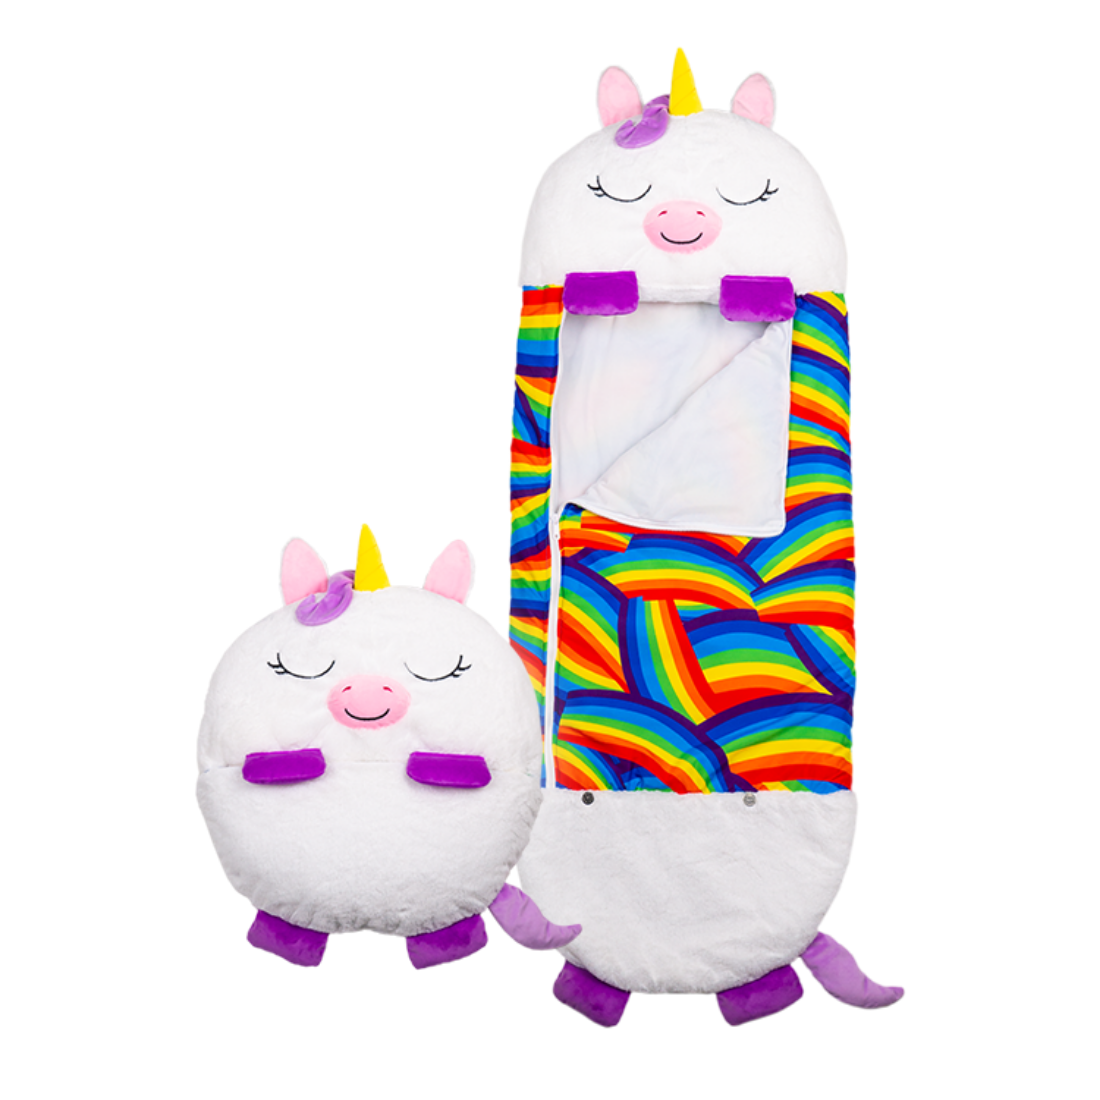 View Happy Nappers Unicorn Medium Ages 3 To 6 Plush Toy That Opens To A Fun Sleeping Bag High Street TV information